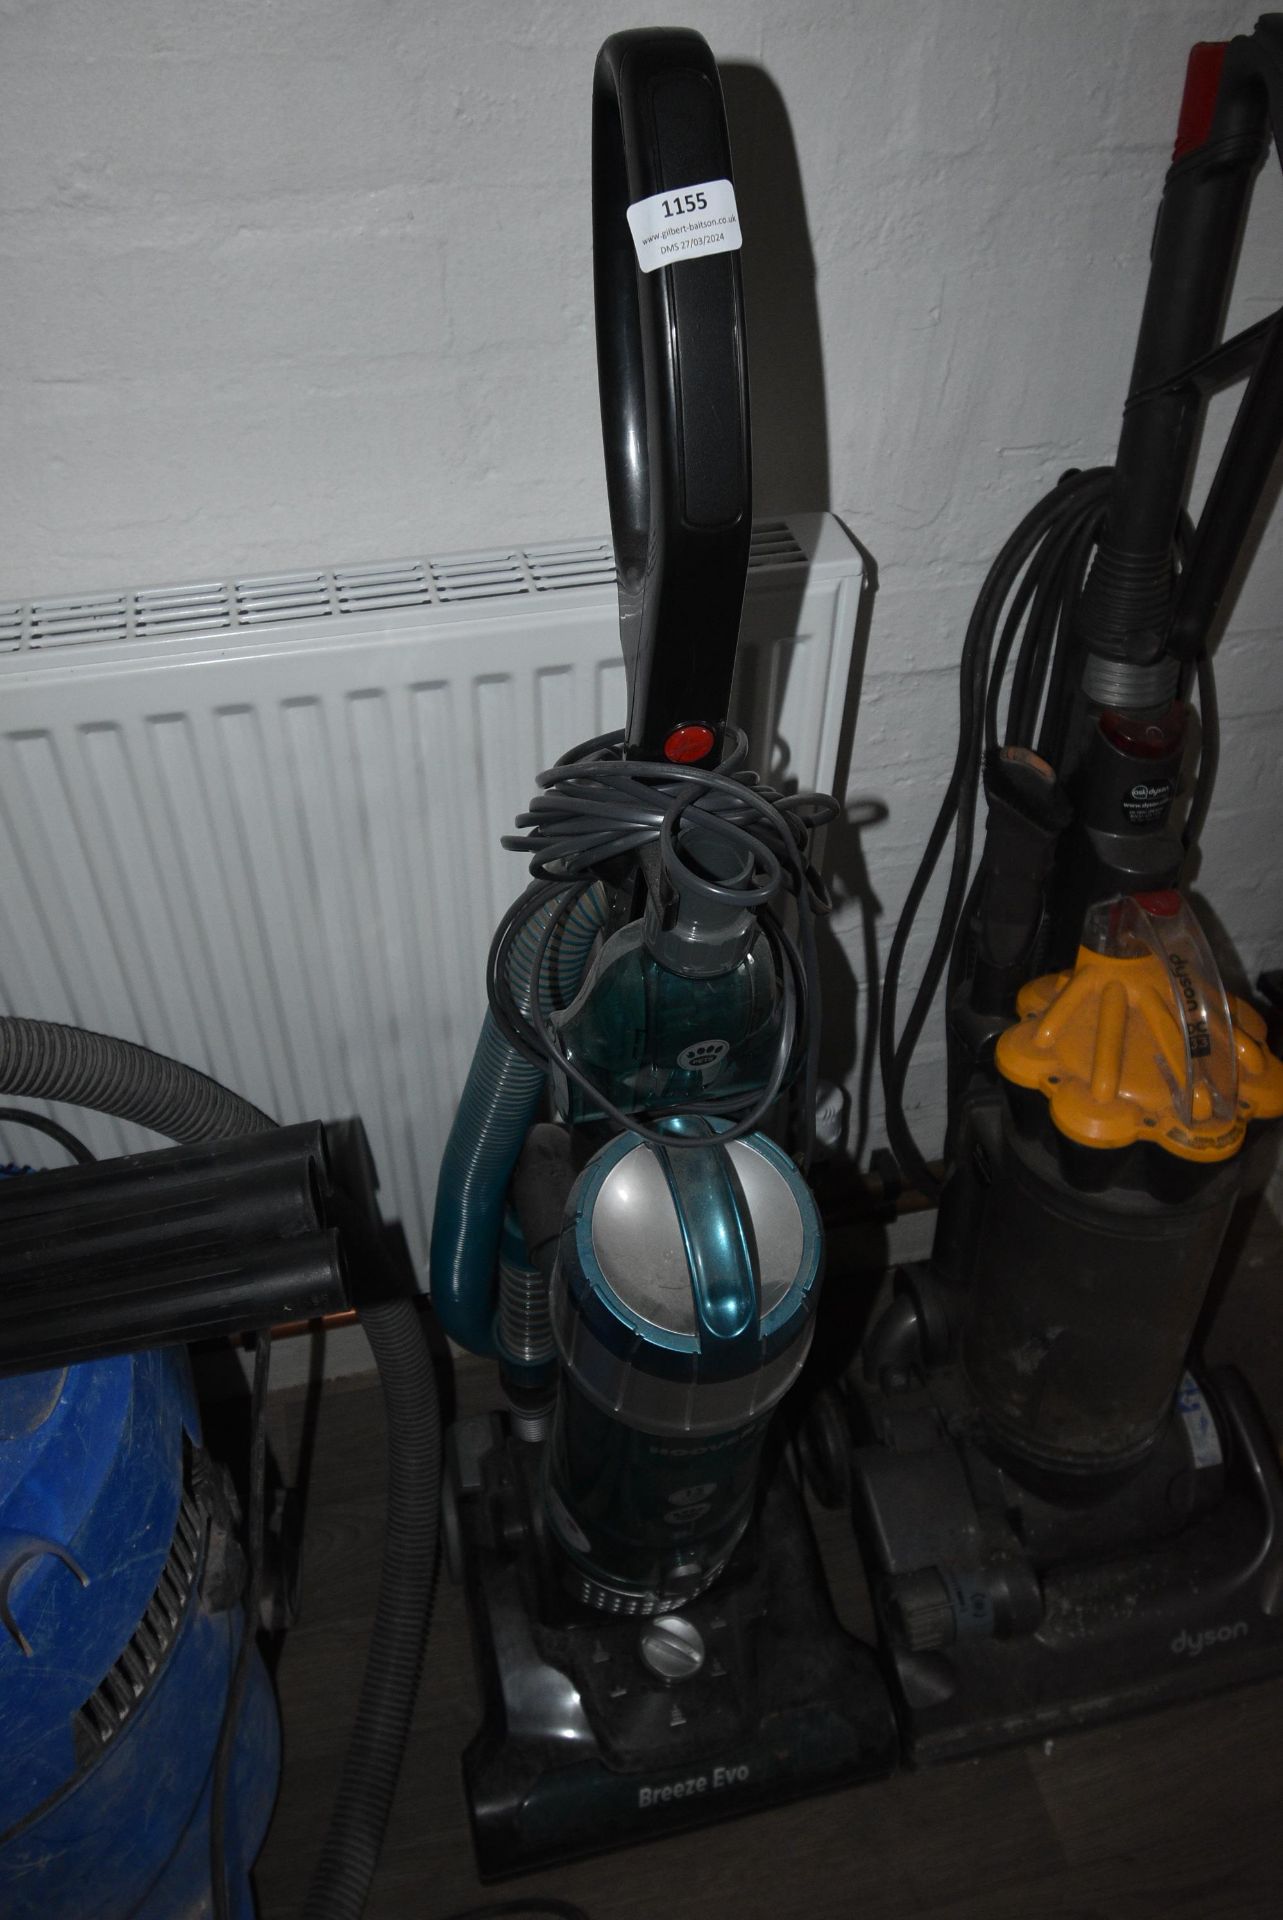 *Hoover Upright Vacuum Cleaner (Location: 64 King Edward St, Grimsby, DN31 3JP, Viewing Tuesday